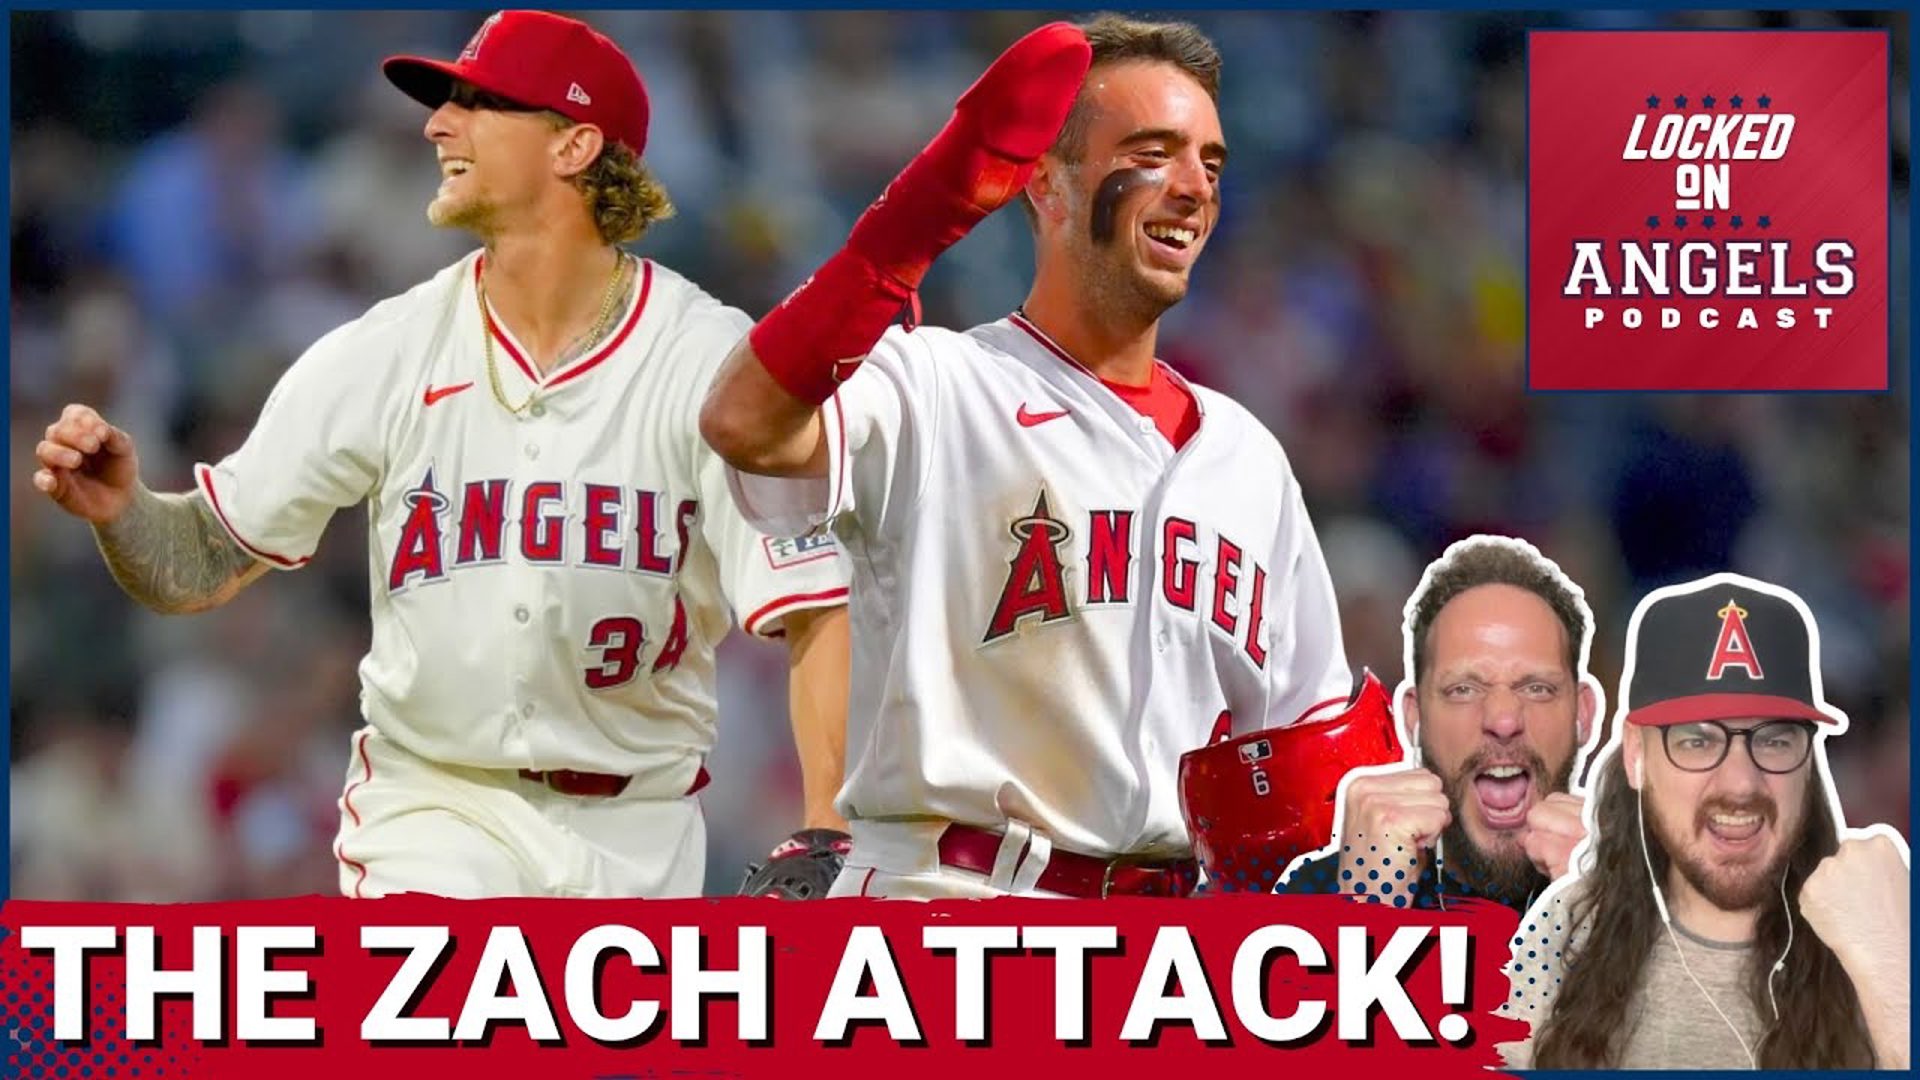 The Los Angeles Angels played some great baseball against the Milwaukee Brewers on Monday night, despite a last-minute start from newly called-up Zach Plesac